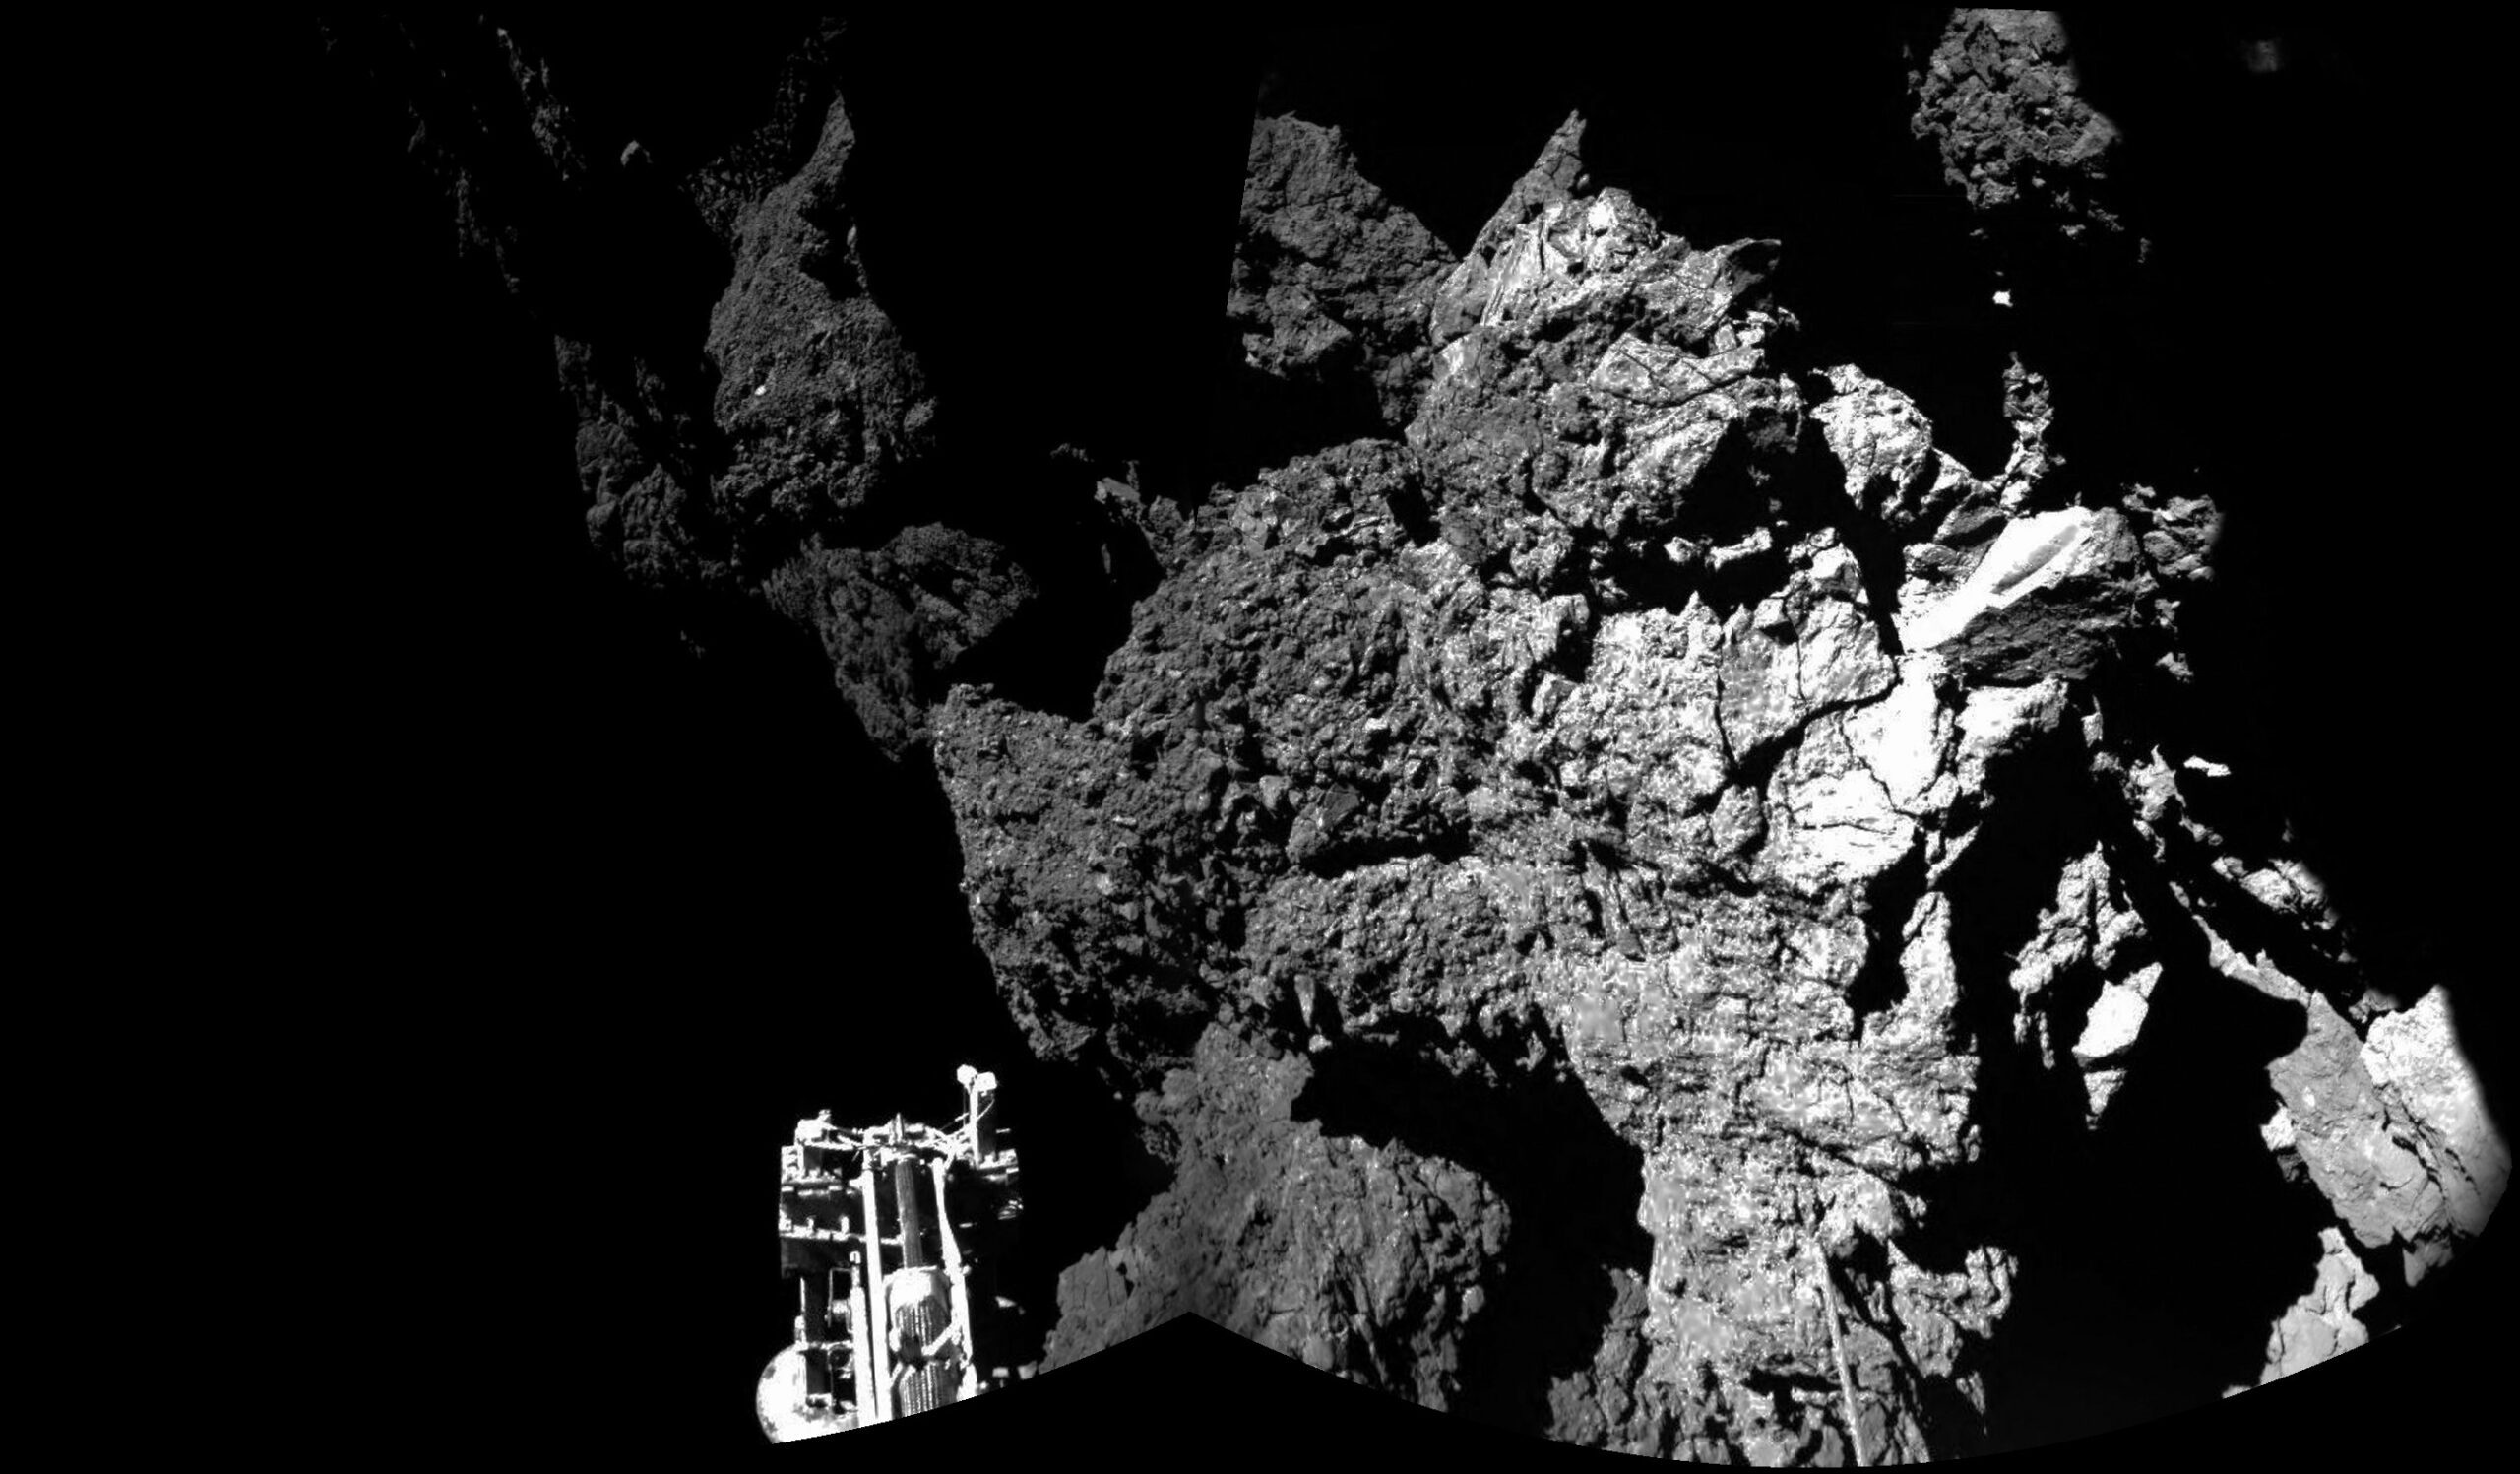 Rosetta, Philae to reunite on comet for Sept 30 mission end